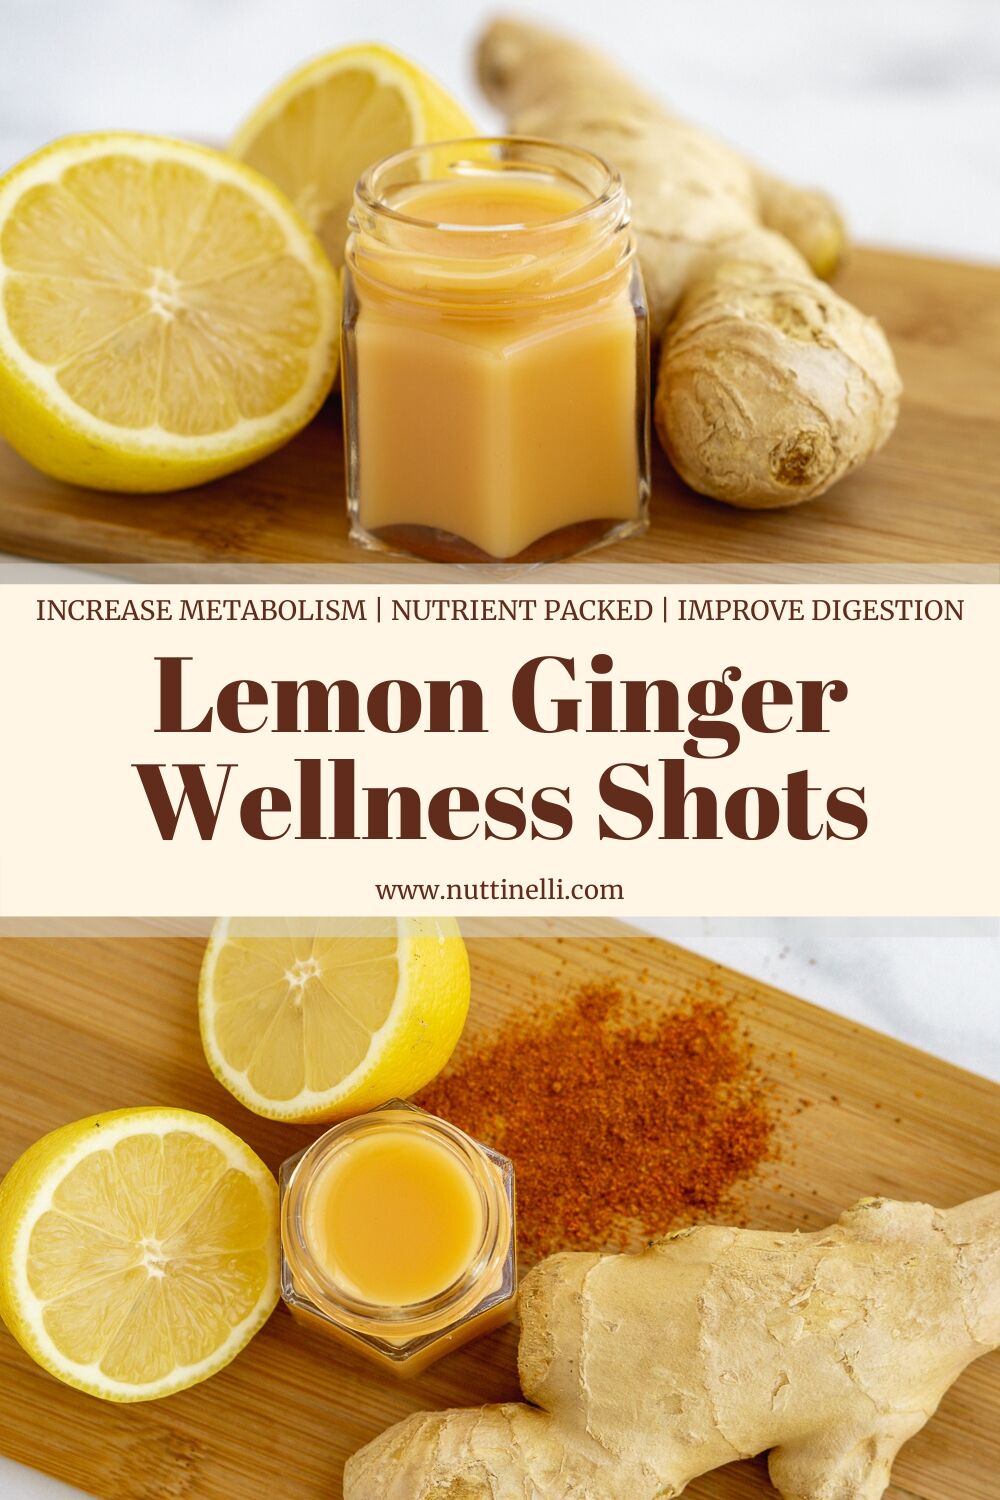 Lemon Ginger Wellness Shots - A Great Way to Start the Day - Nutti Nelli